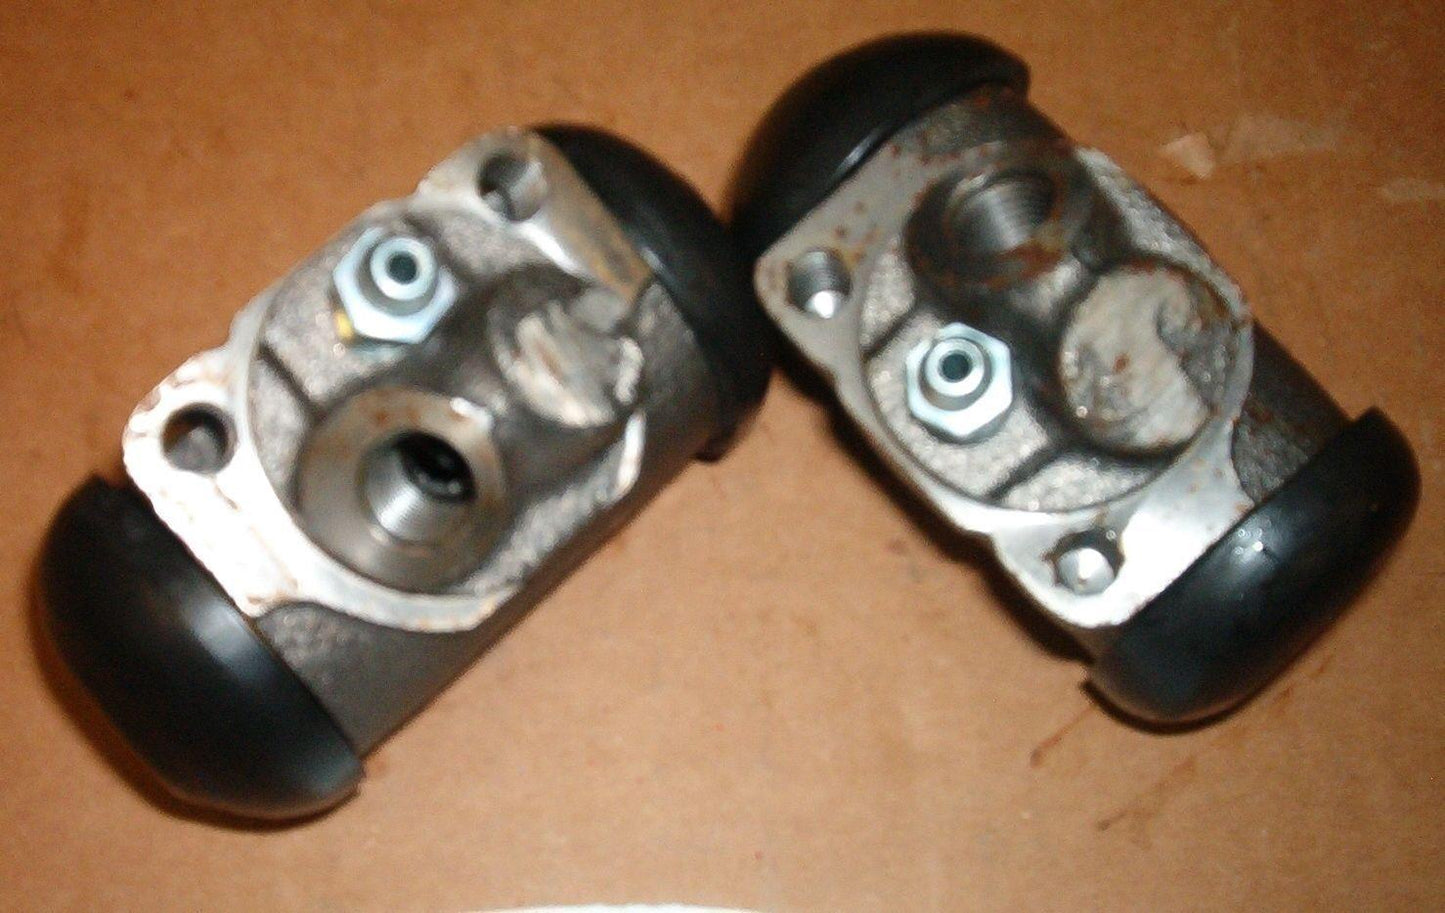 Buick Pontiac Wheel Cylinders also Cadillac Oldsmobile front 1935-1958 2 cylind